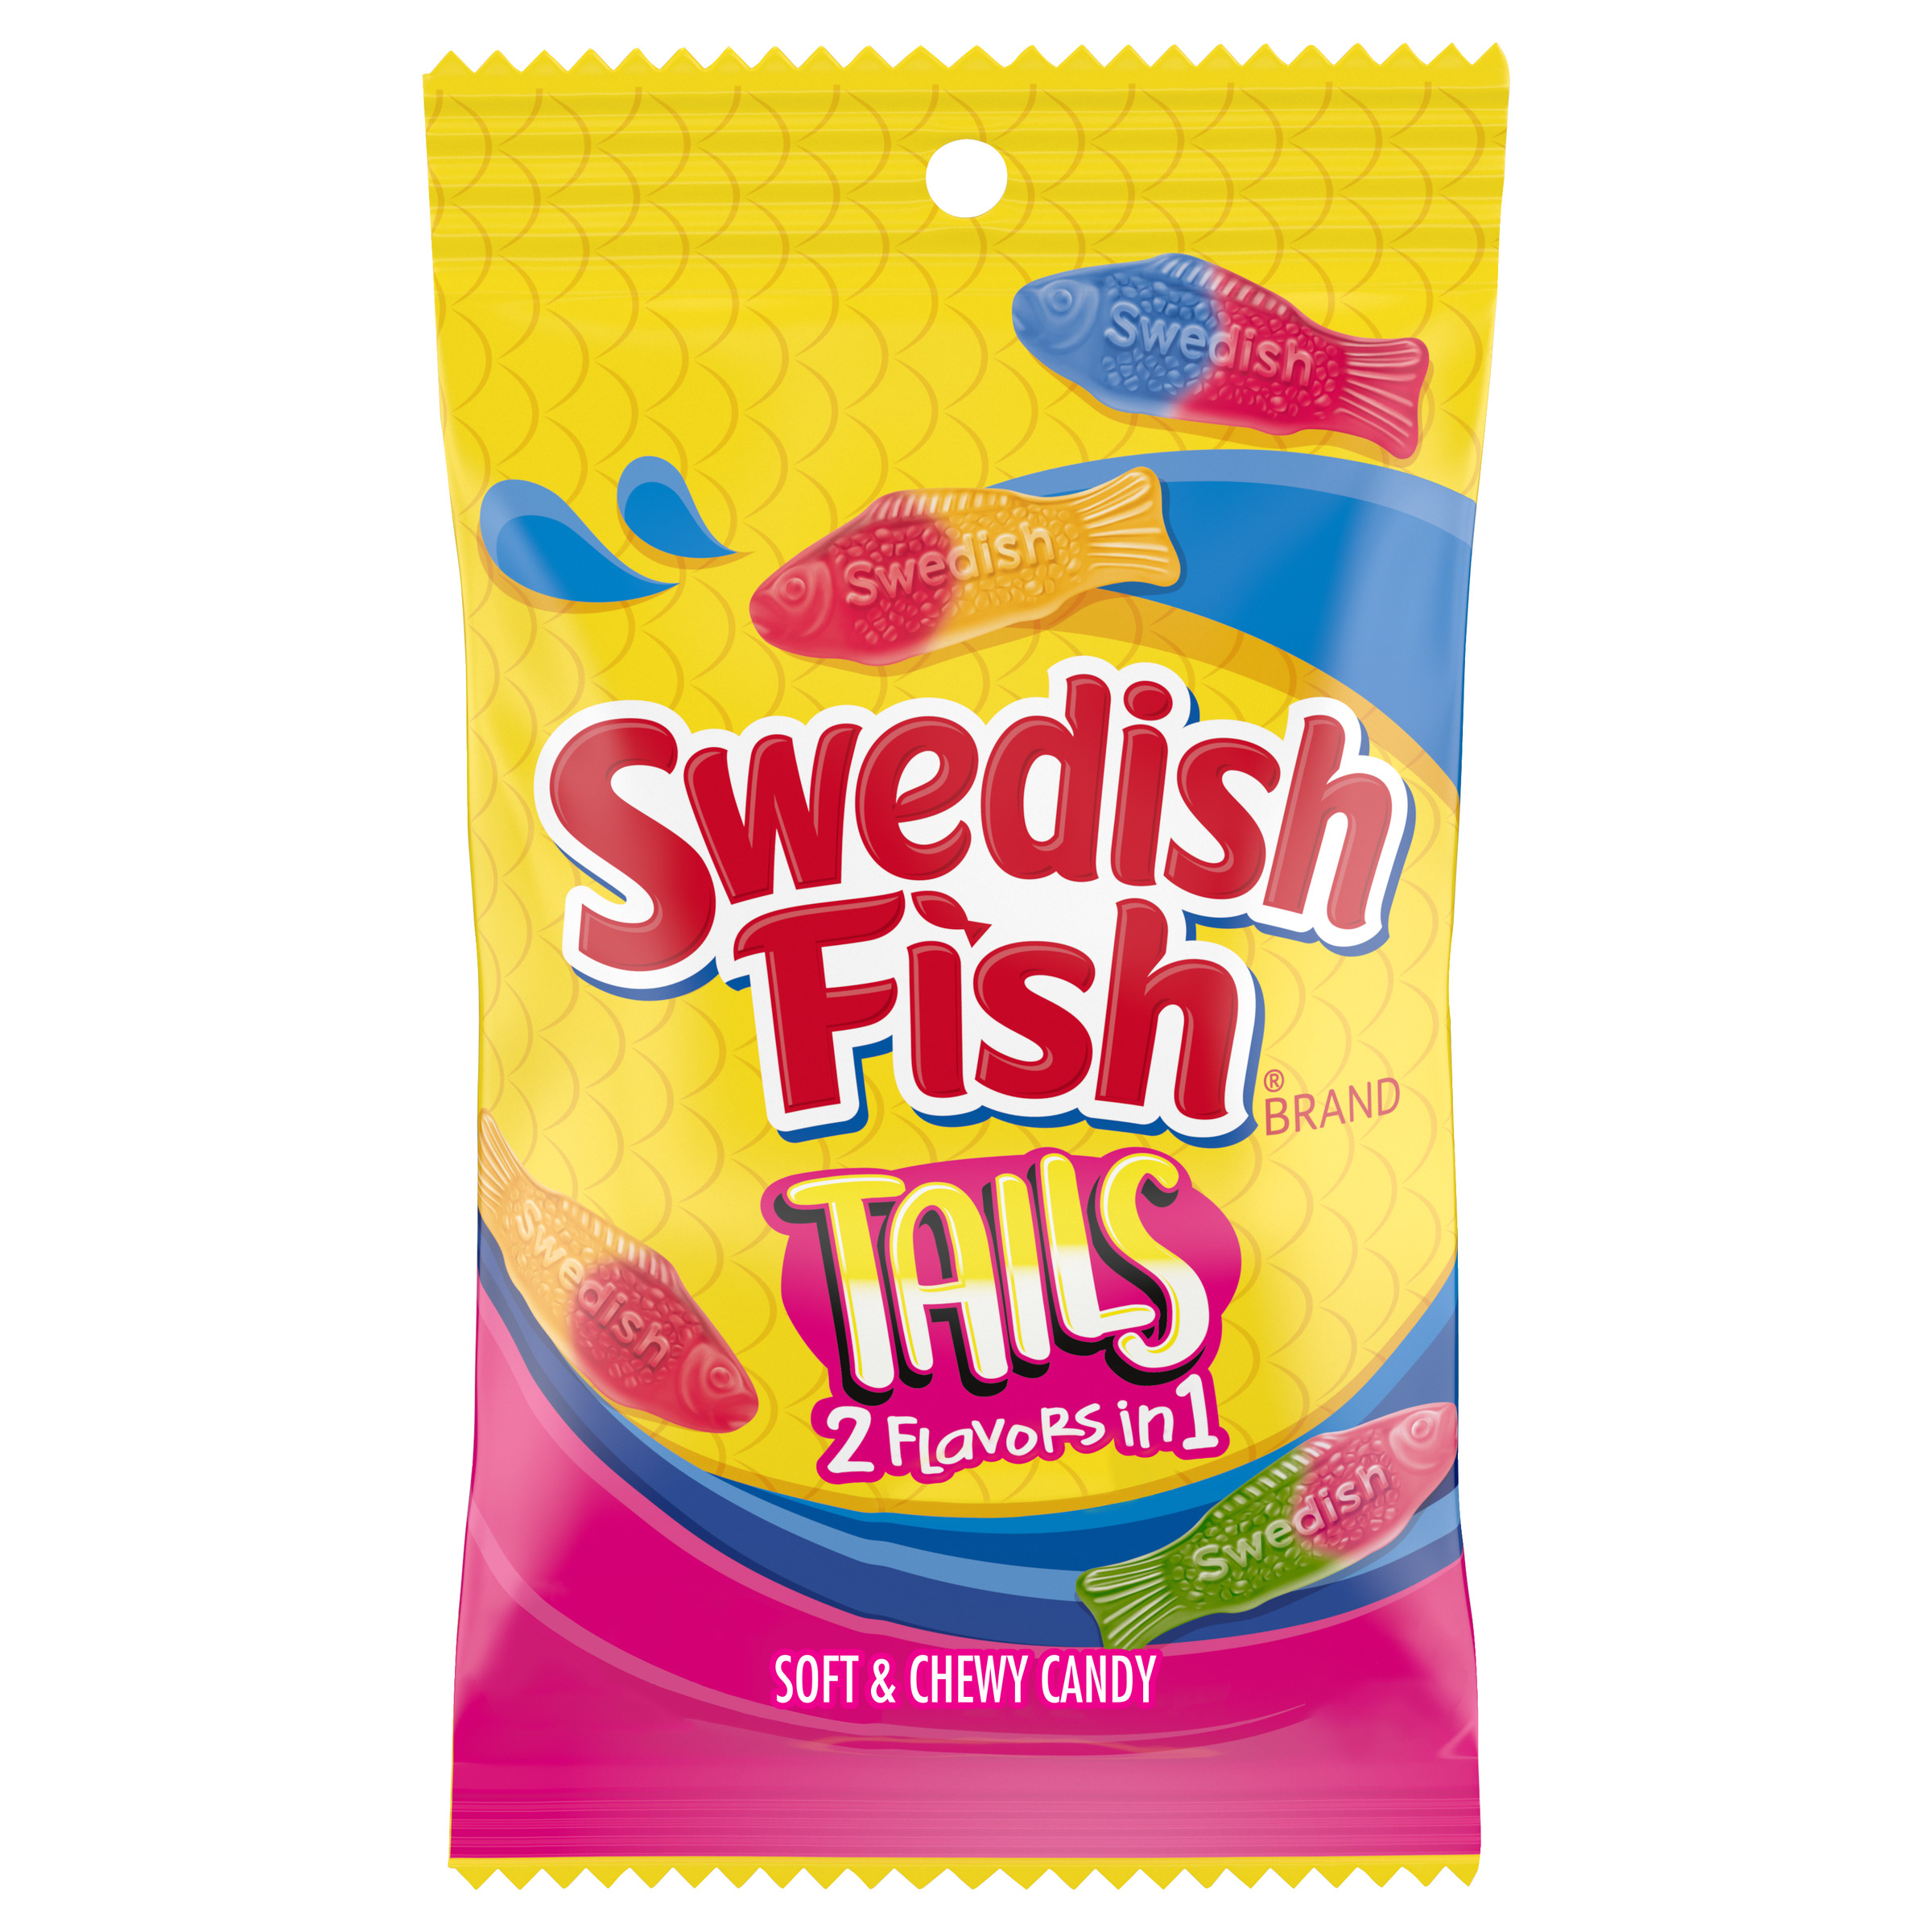 SWEDISH FISH Tails 2 Flavors in 1 Soft & Chewy Candy, 8 oz-0